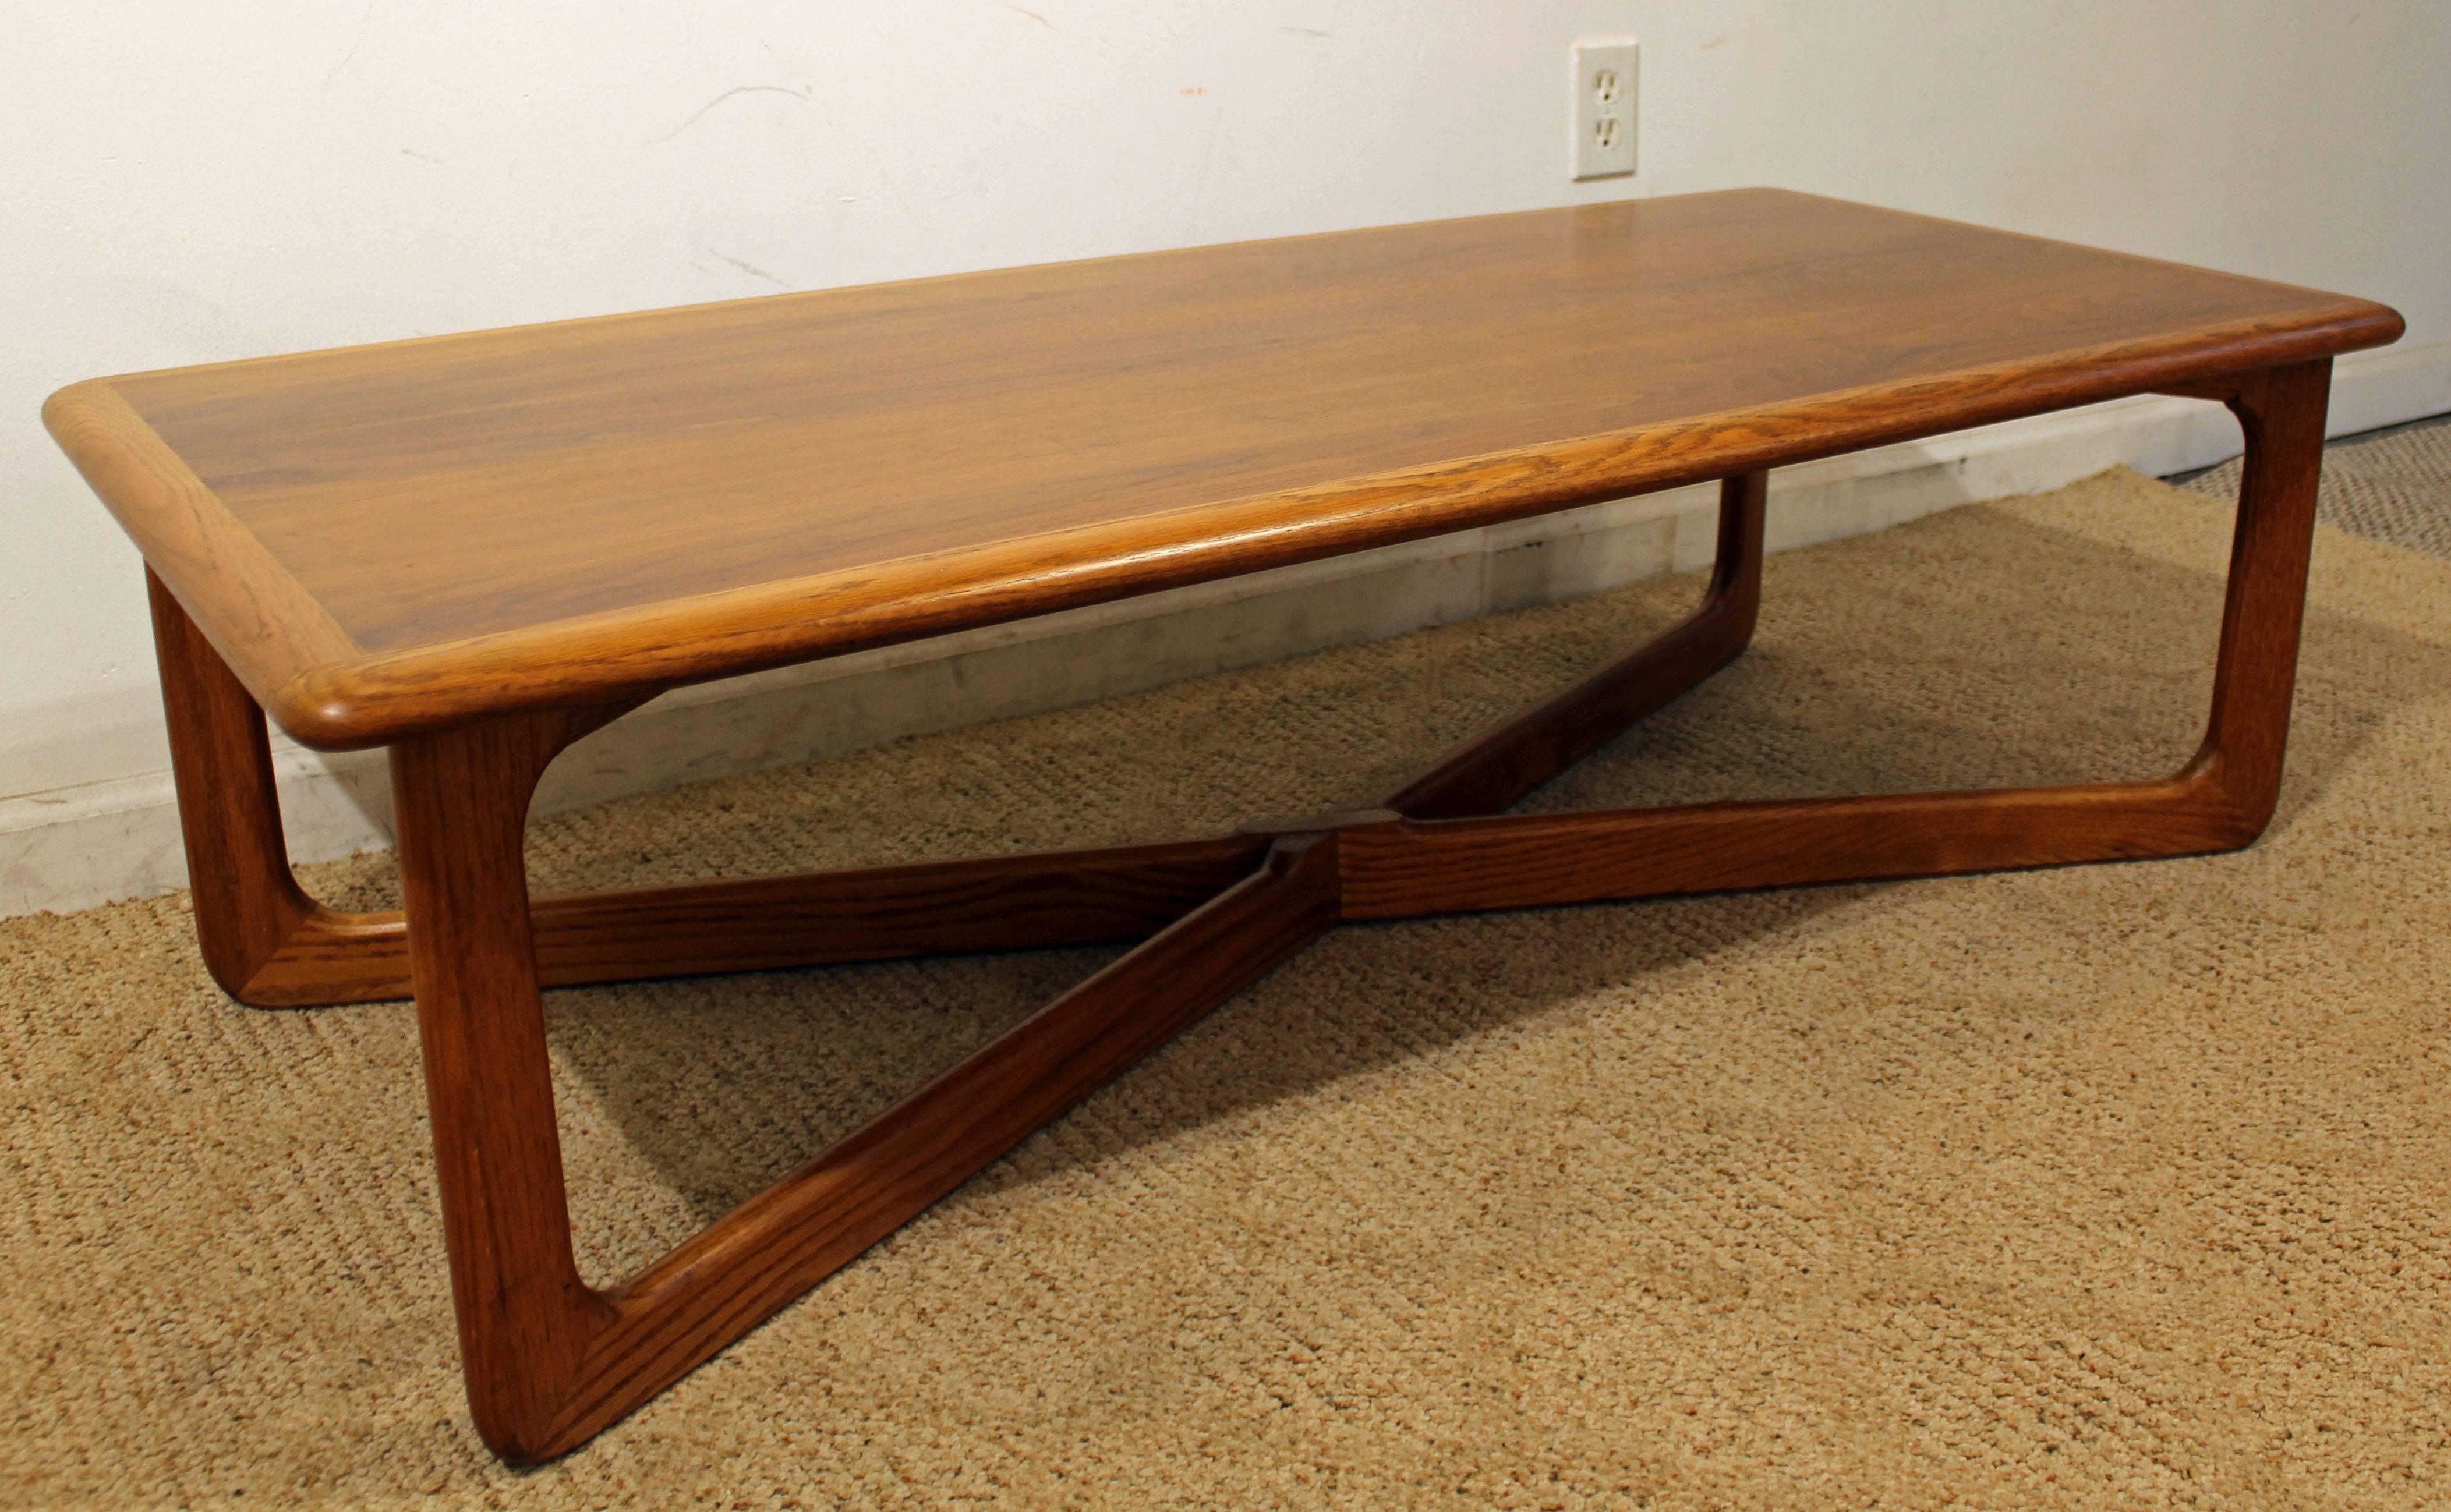 Offered is a nice Mid-Century Modern coffee table made by Lane 